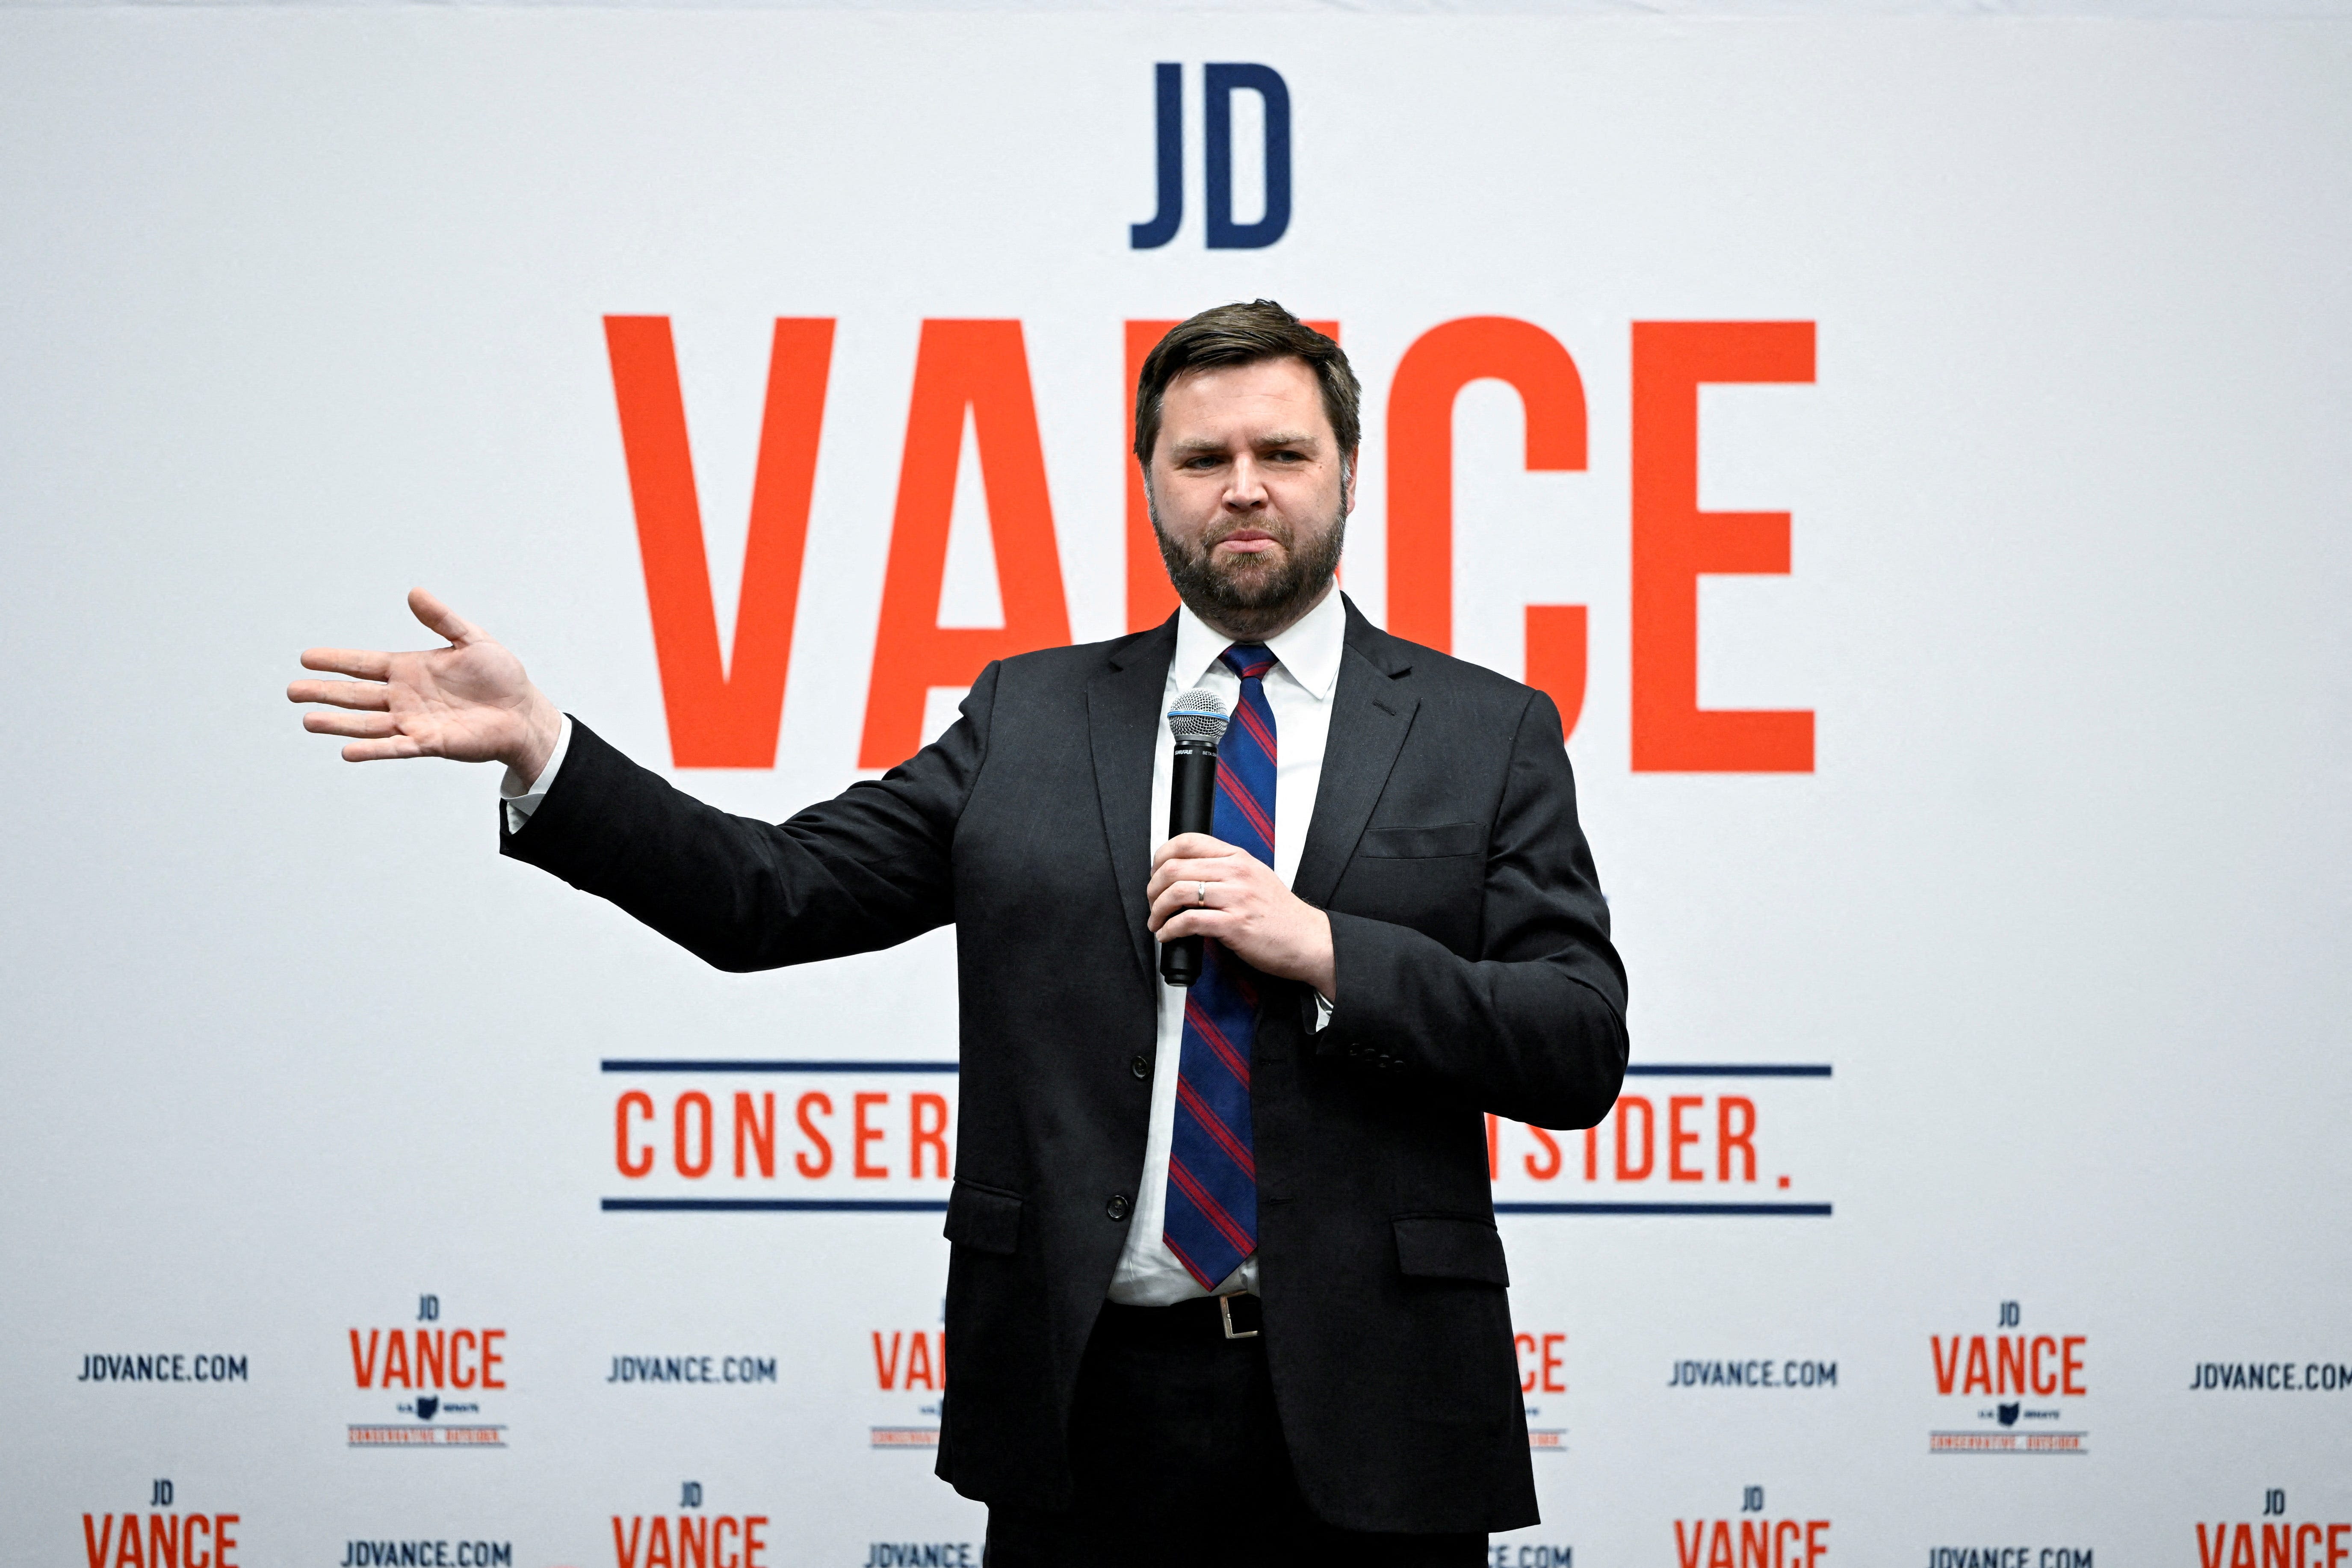 JD Vance to describe difficult upbringing in RNC acceptance speech